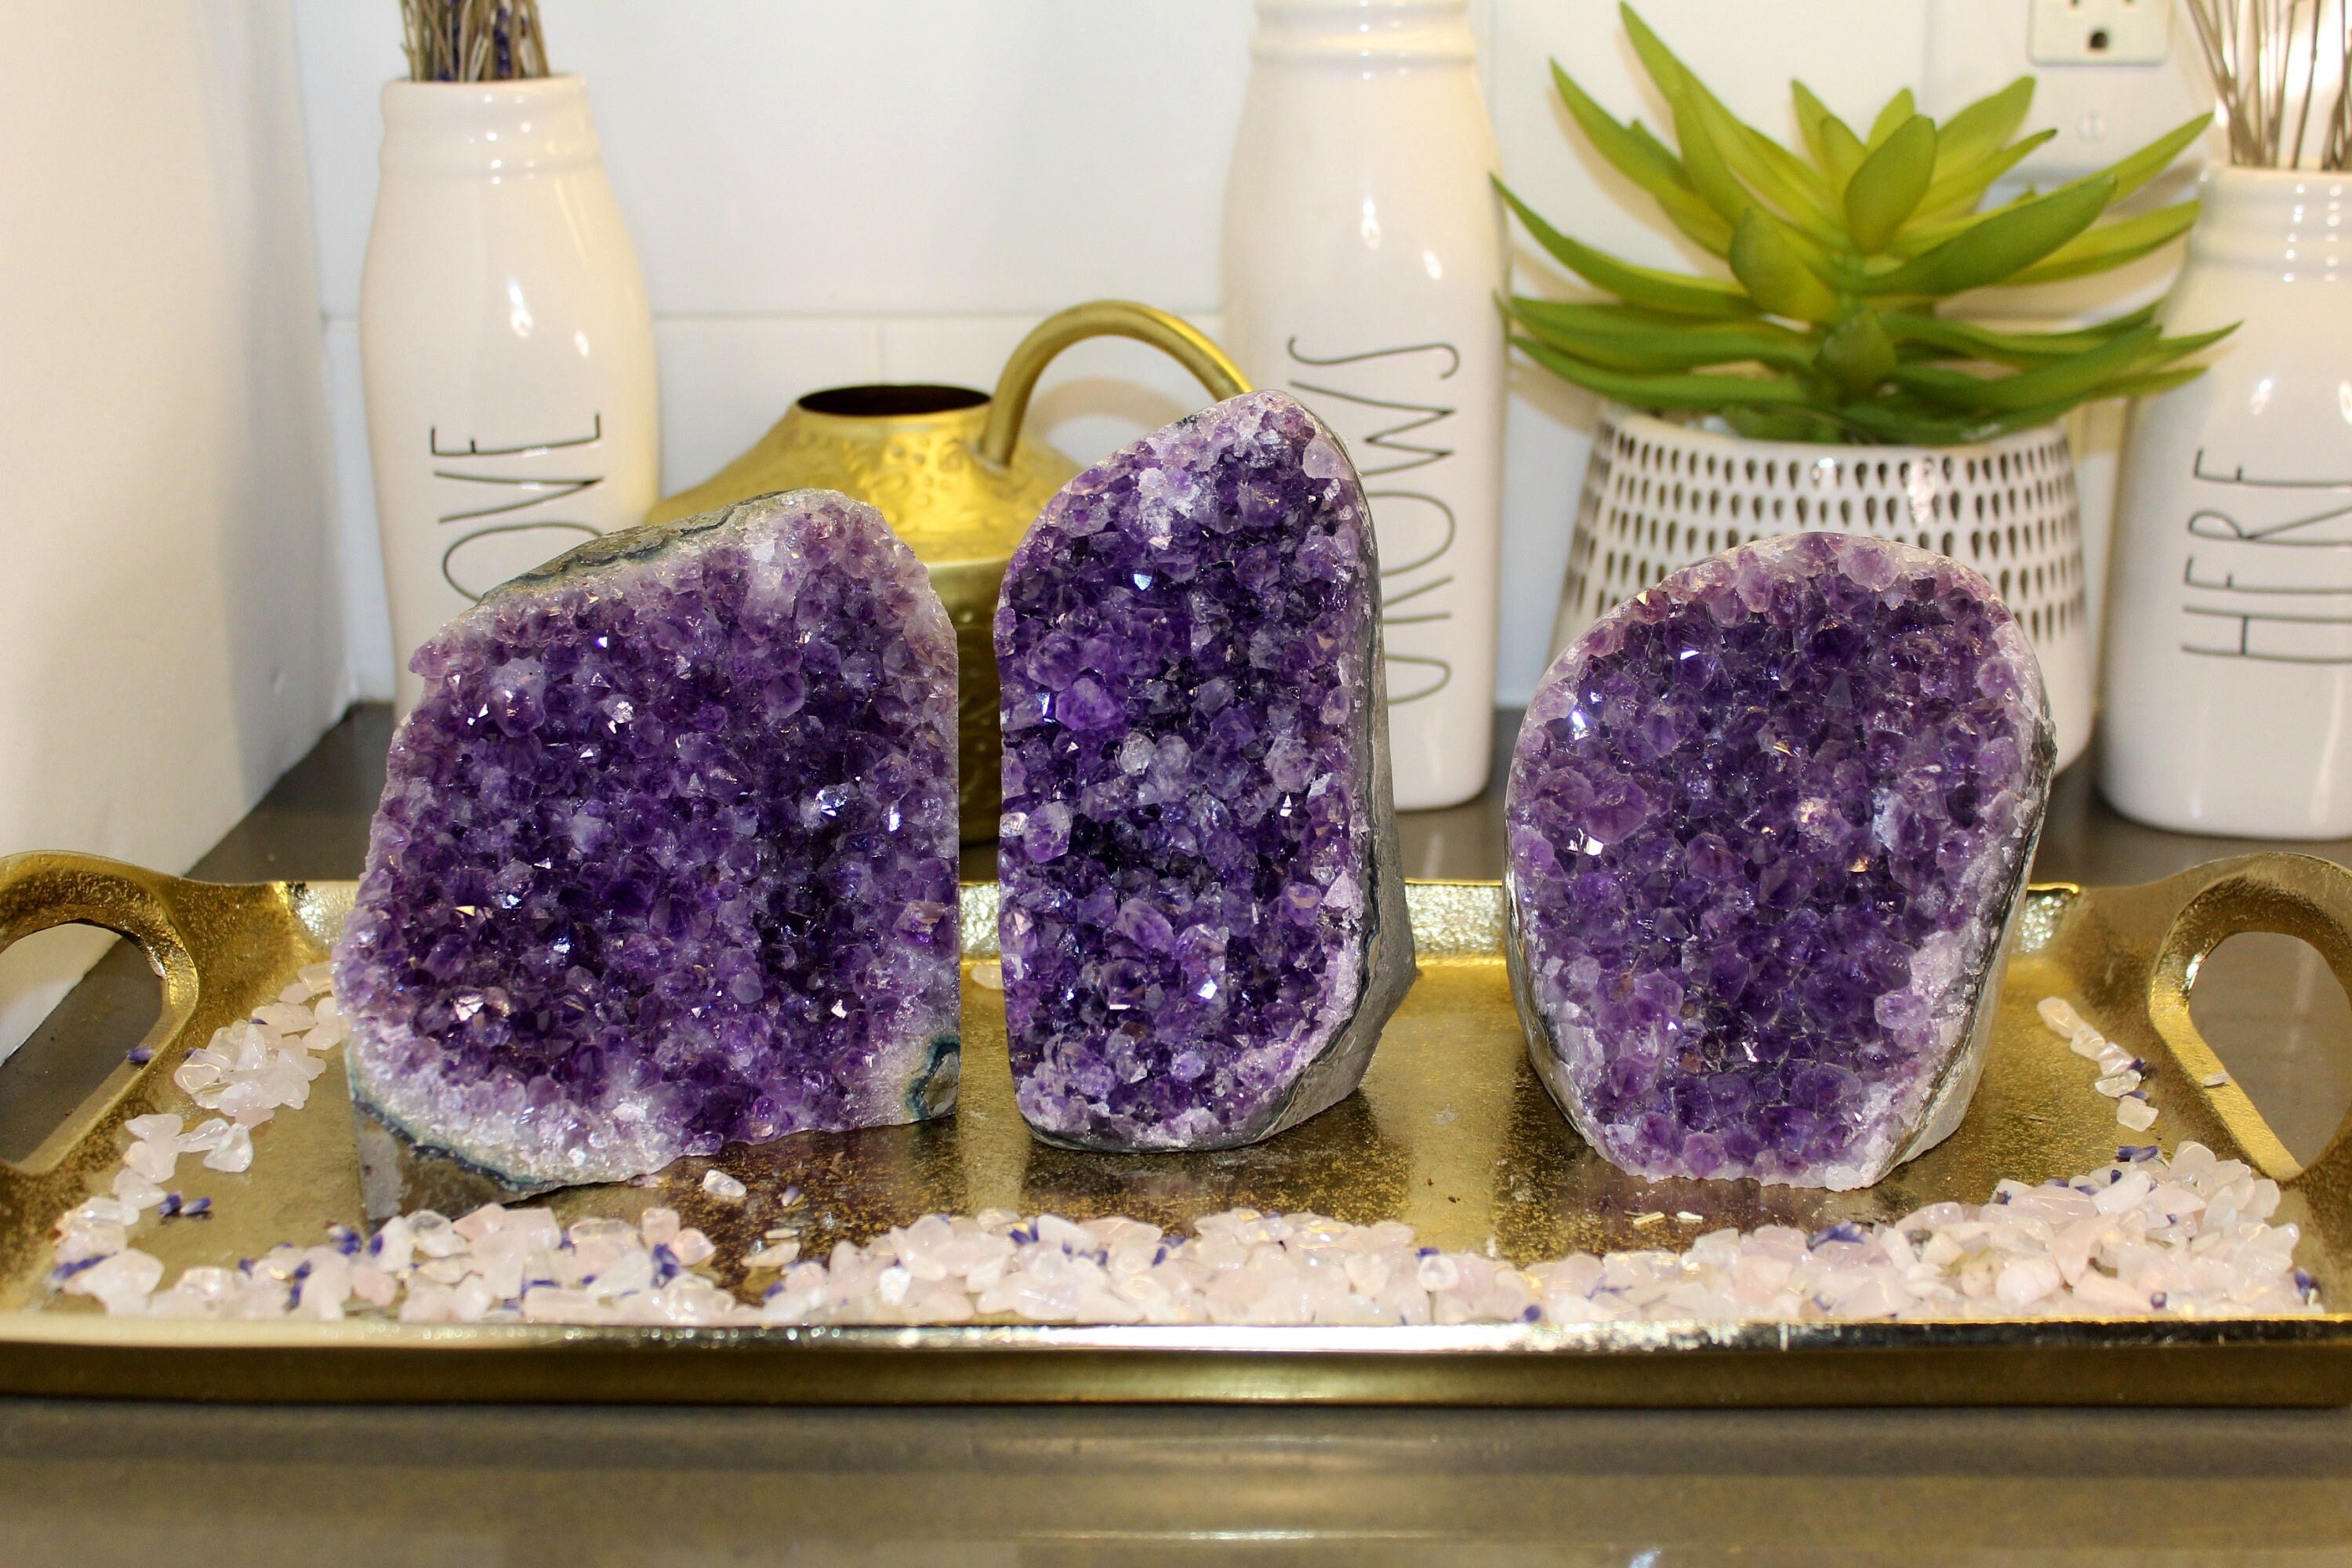 X-large Amethyst Cathedral, Amethyst Geode, Raw Amethyst, Amethyst Cluster,  Amethyst Druze, Crystals, Pick a Weight 